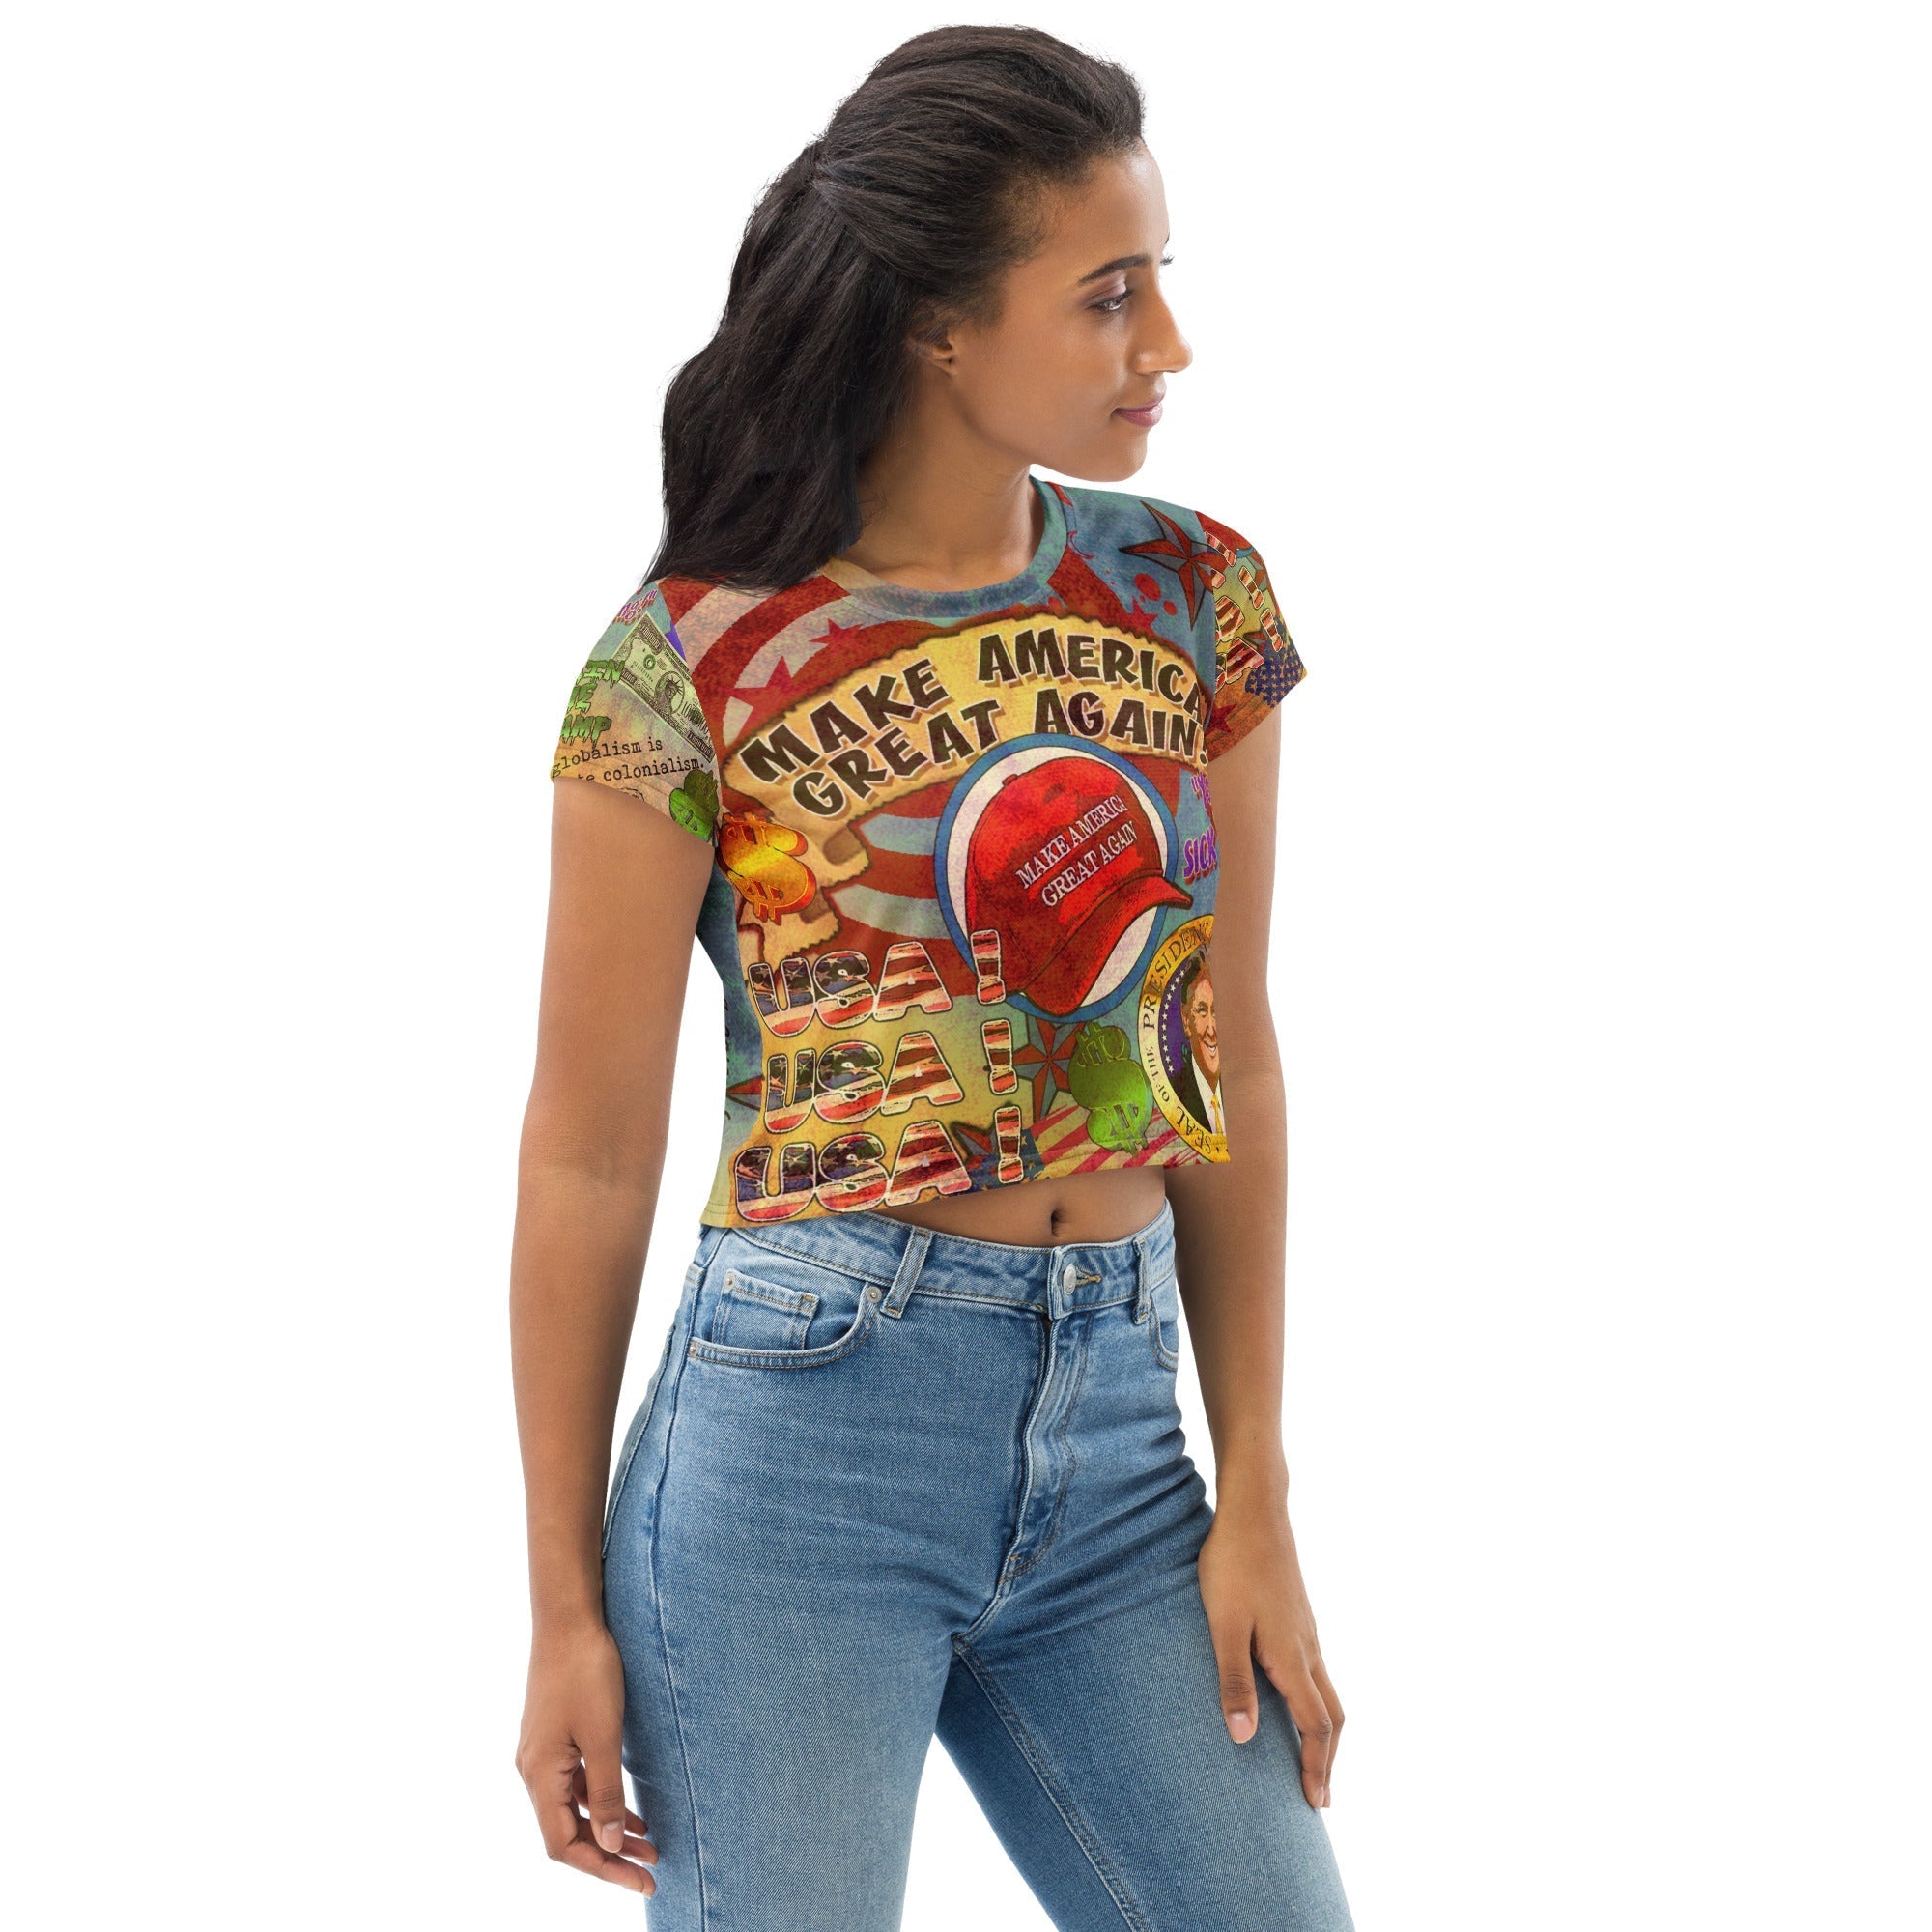 The "MAKE AMERICA GREAT AGAIN" CROP TOP for women